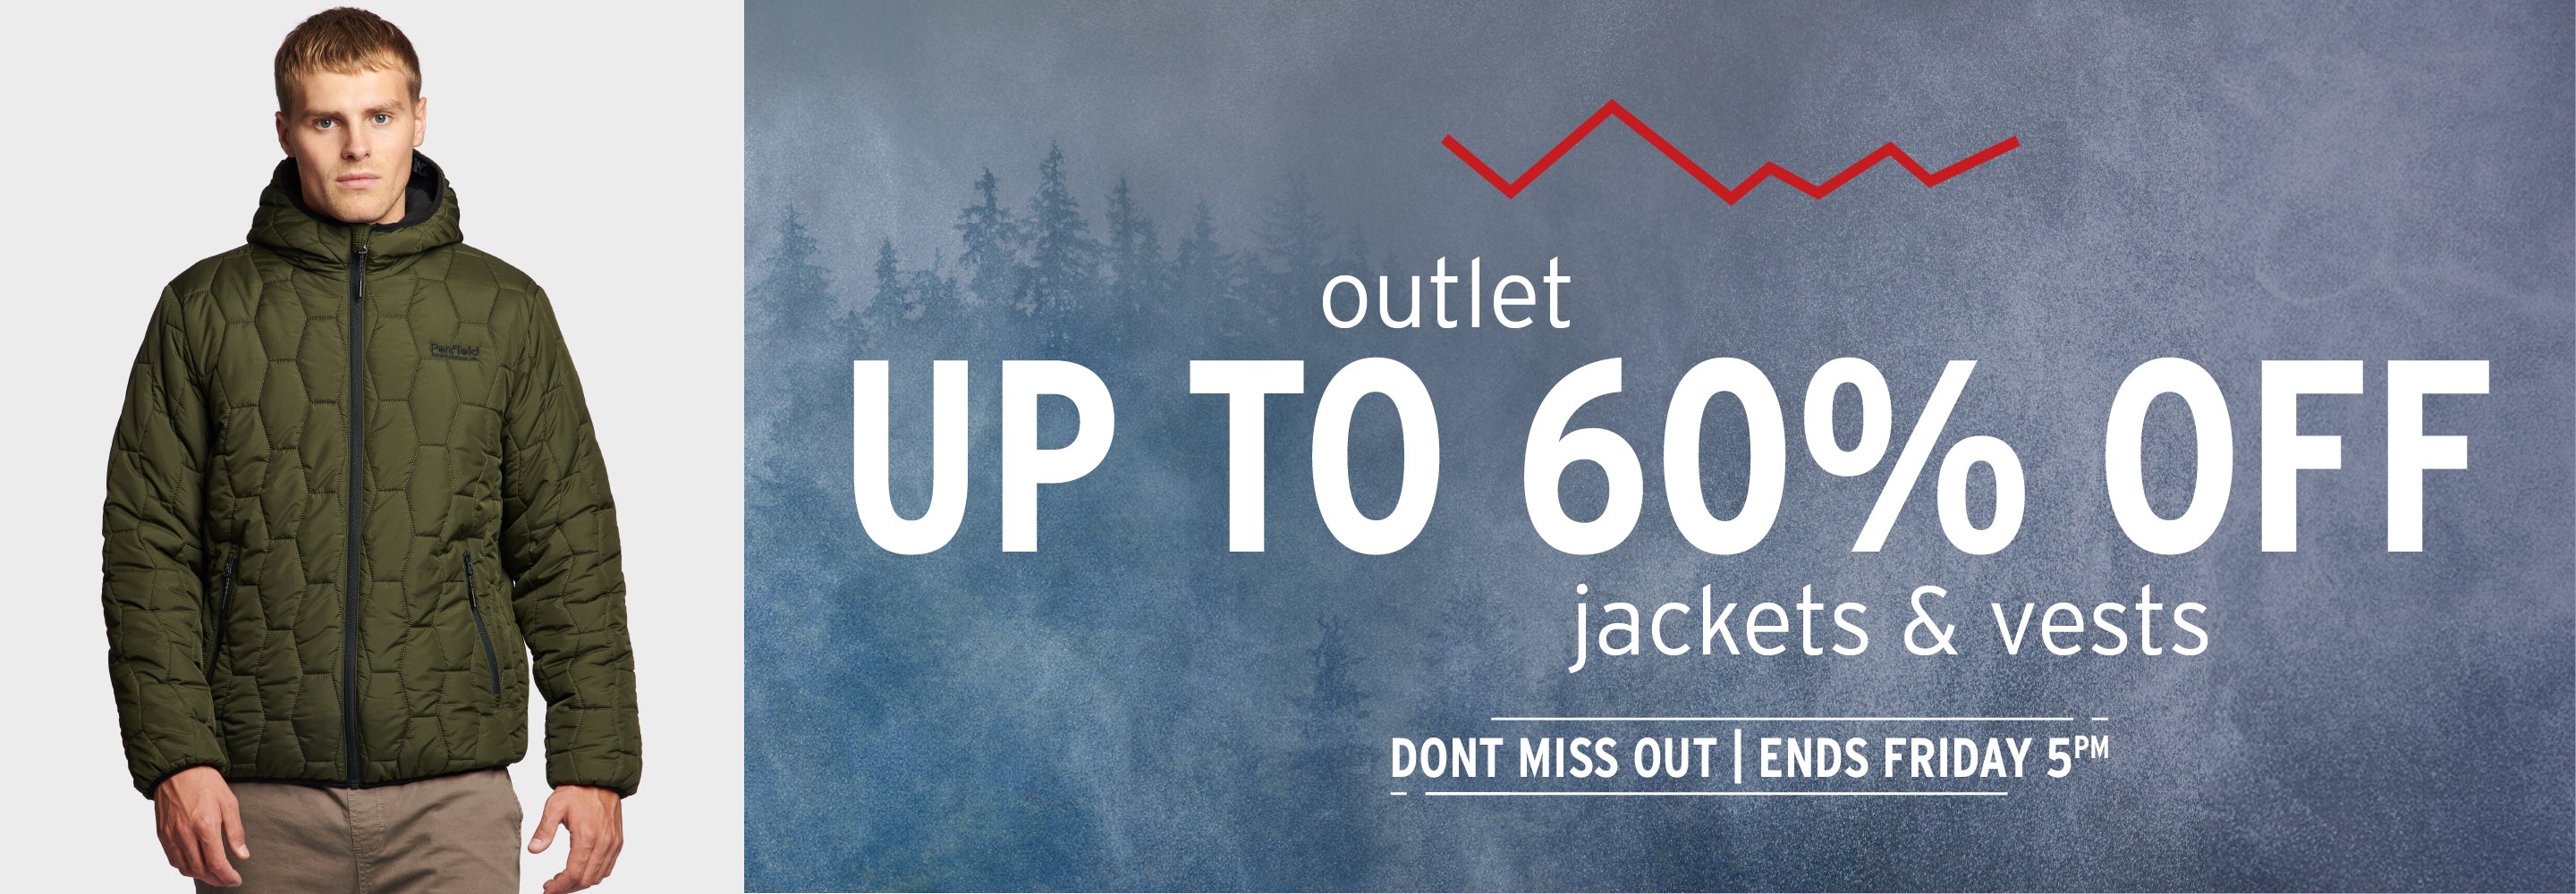 Outlet Up to 60% Off Jackets & Vests | Ends This Friday @5pm